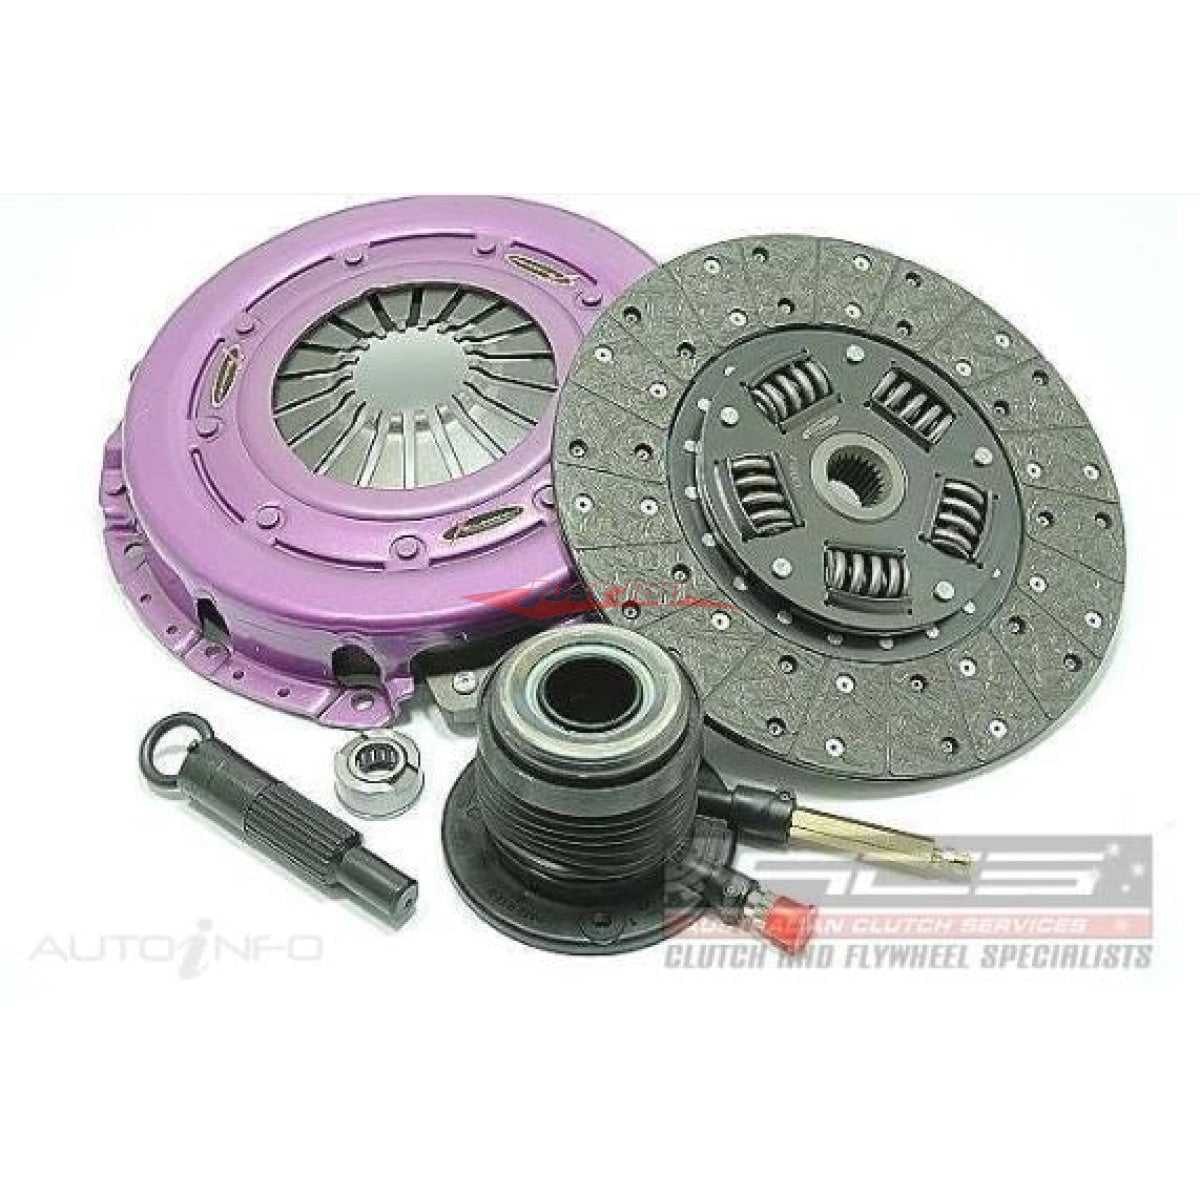 Xtreme, Xtreme Heavy Duty Organic Clutch With Concentric Slave Fits Ford Falcon XR6 Turbo (BA-BF)